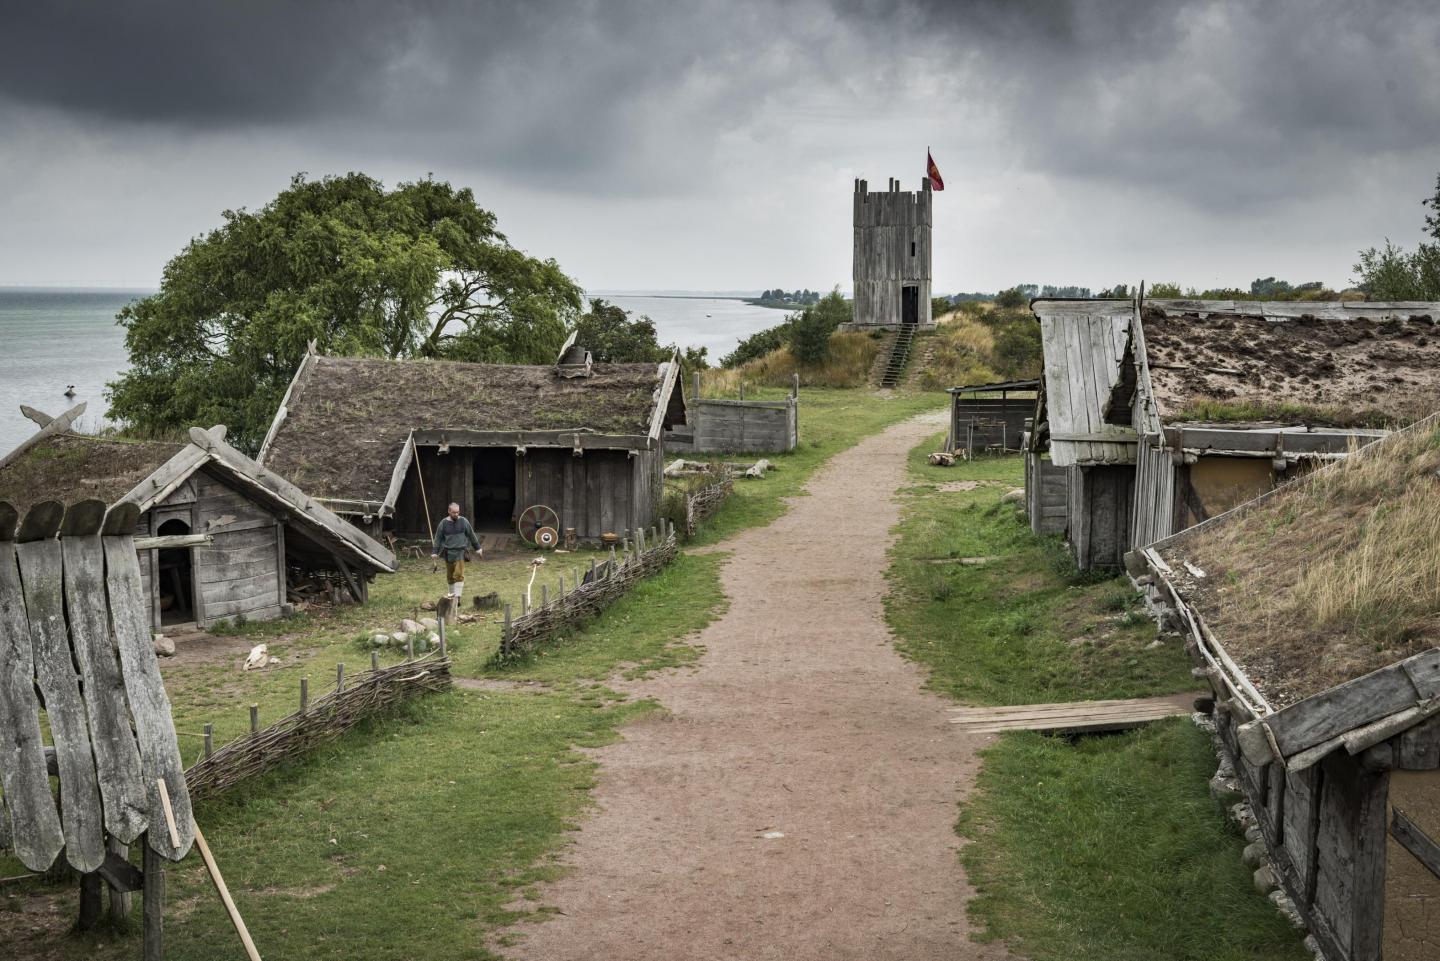 A gravel road and surrounding wooden houses in the Viking village of Fotevikens Museums